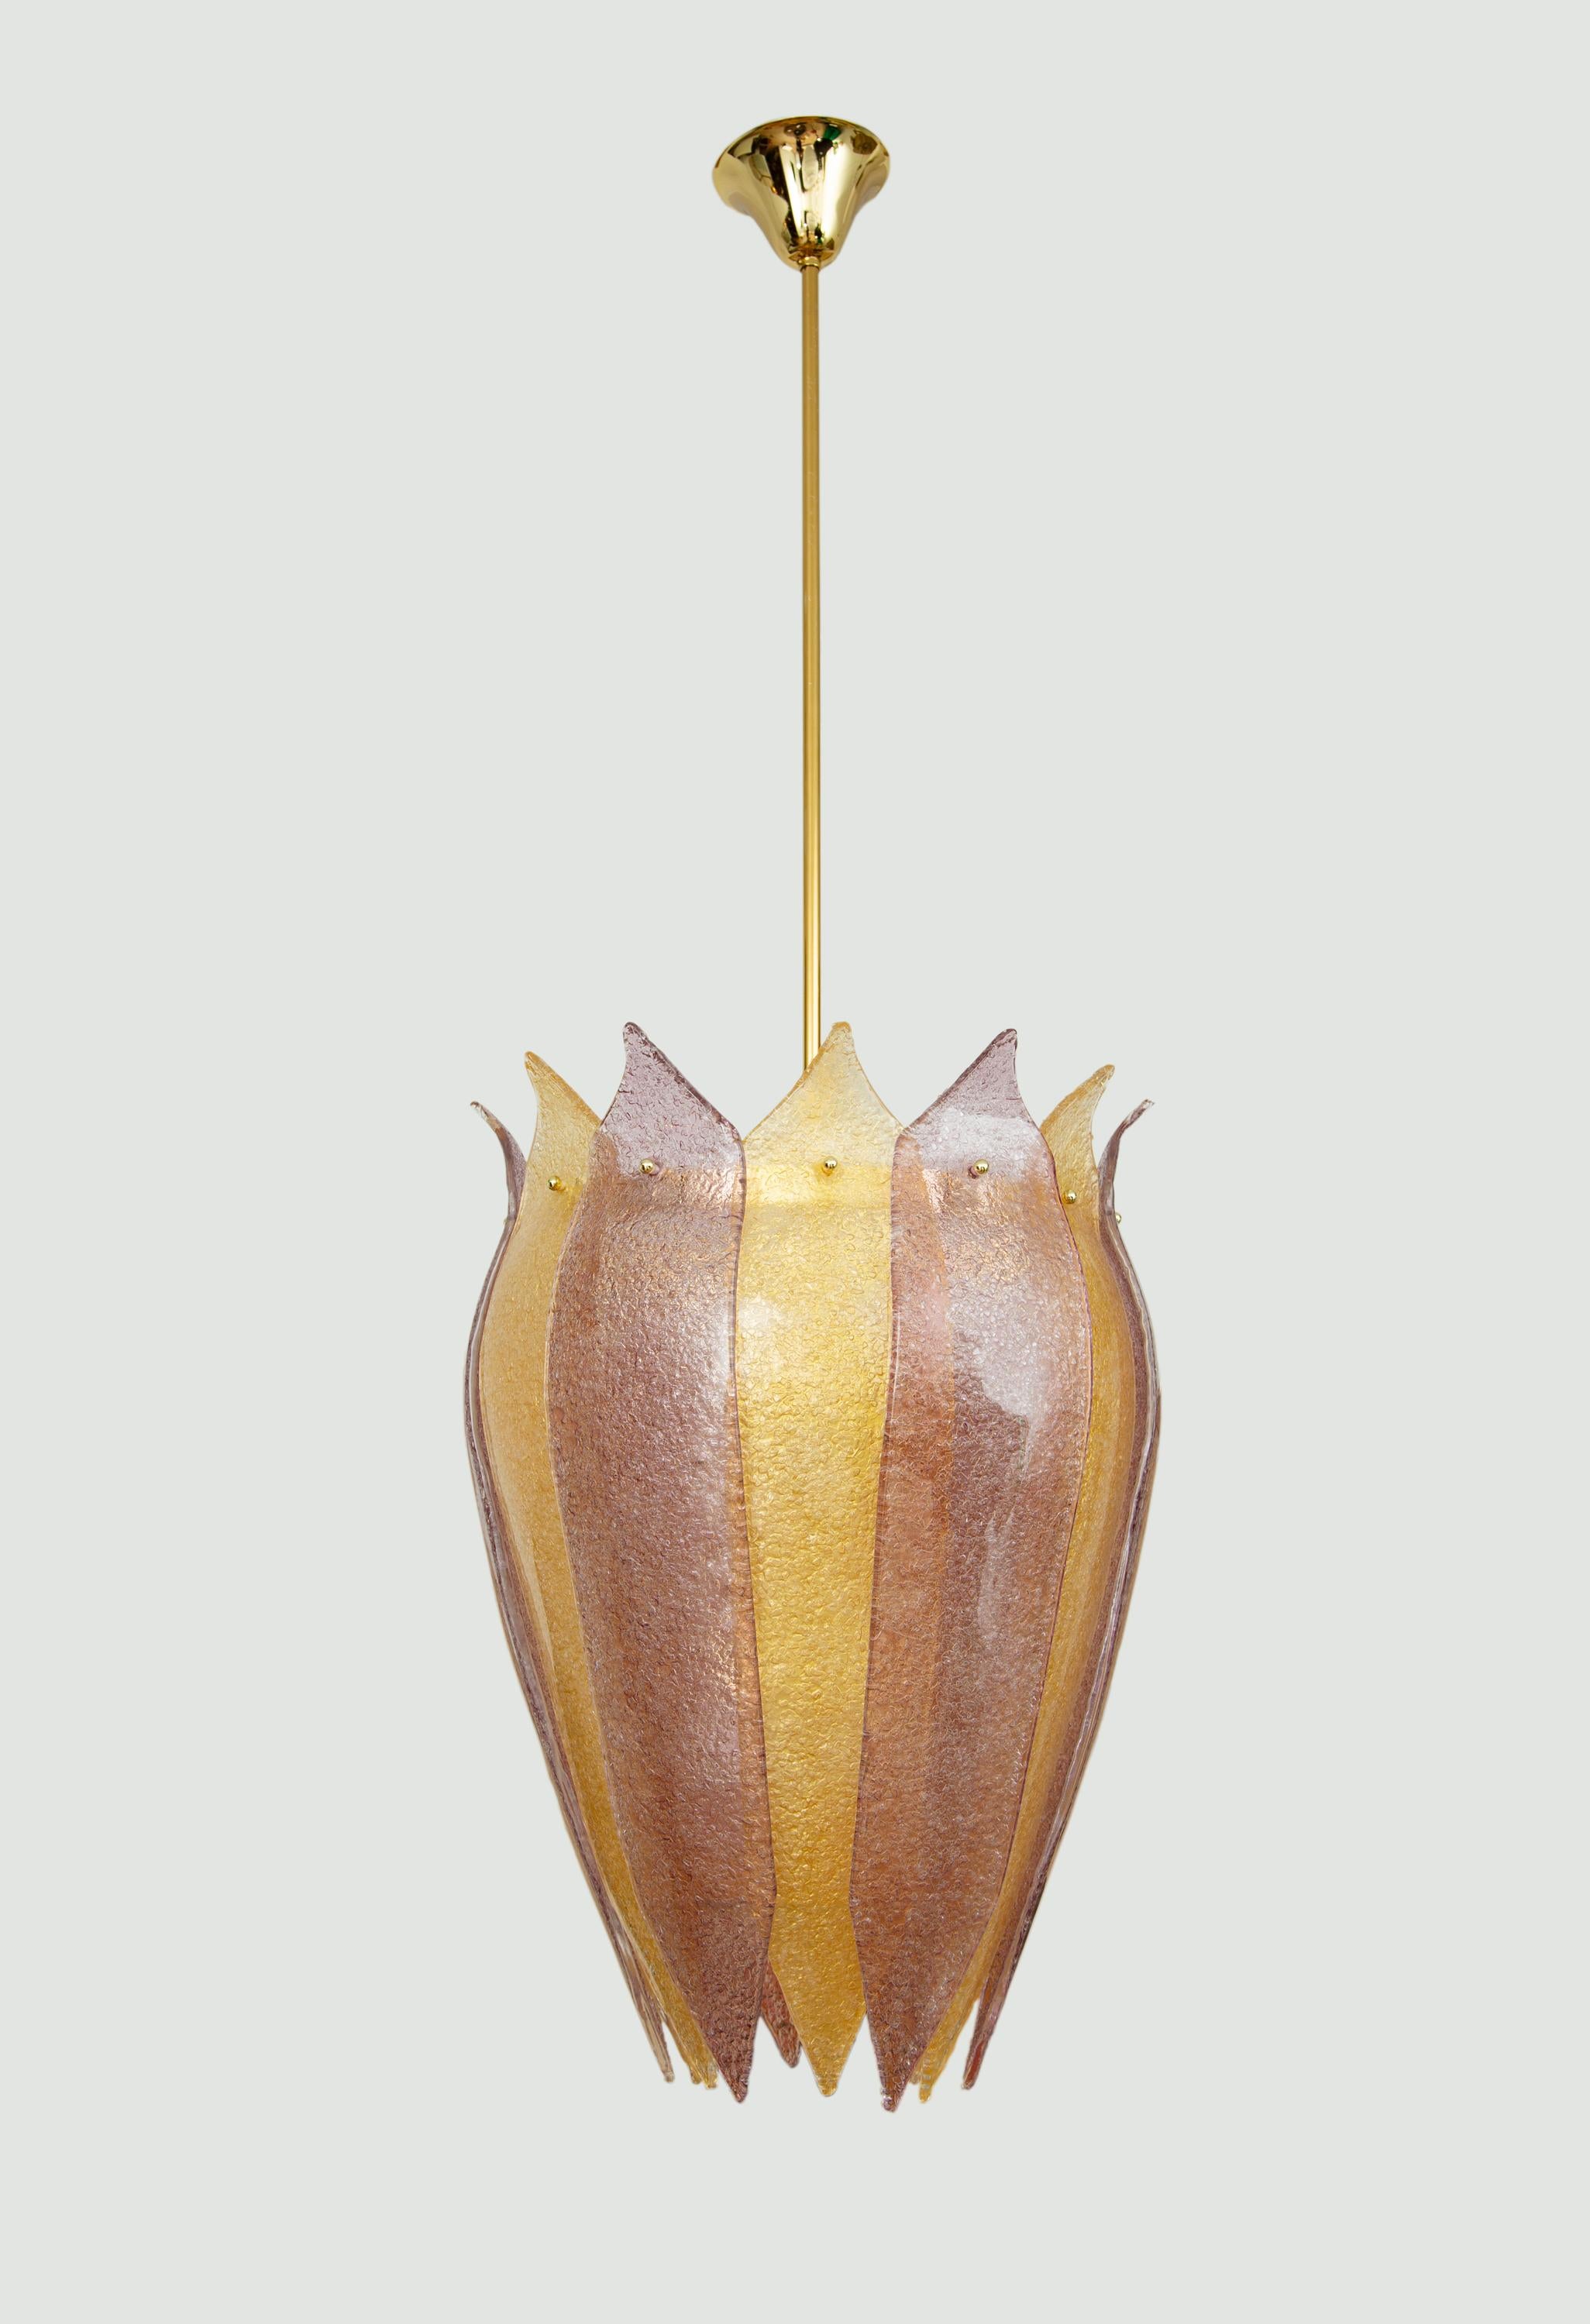 Pair of Murano glass lantern or cesendello, in stock
Curved form “graniglia” hand blown glass leaves in gold and amethyst.
Silhouette is inspired by the ancient street lanterns of Venice
Brass structure with a 65